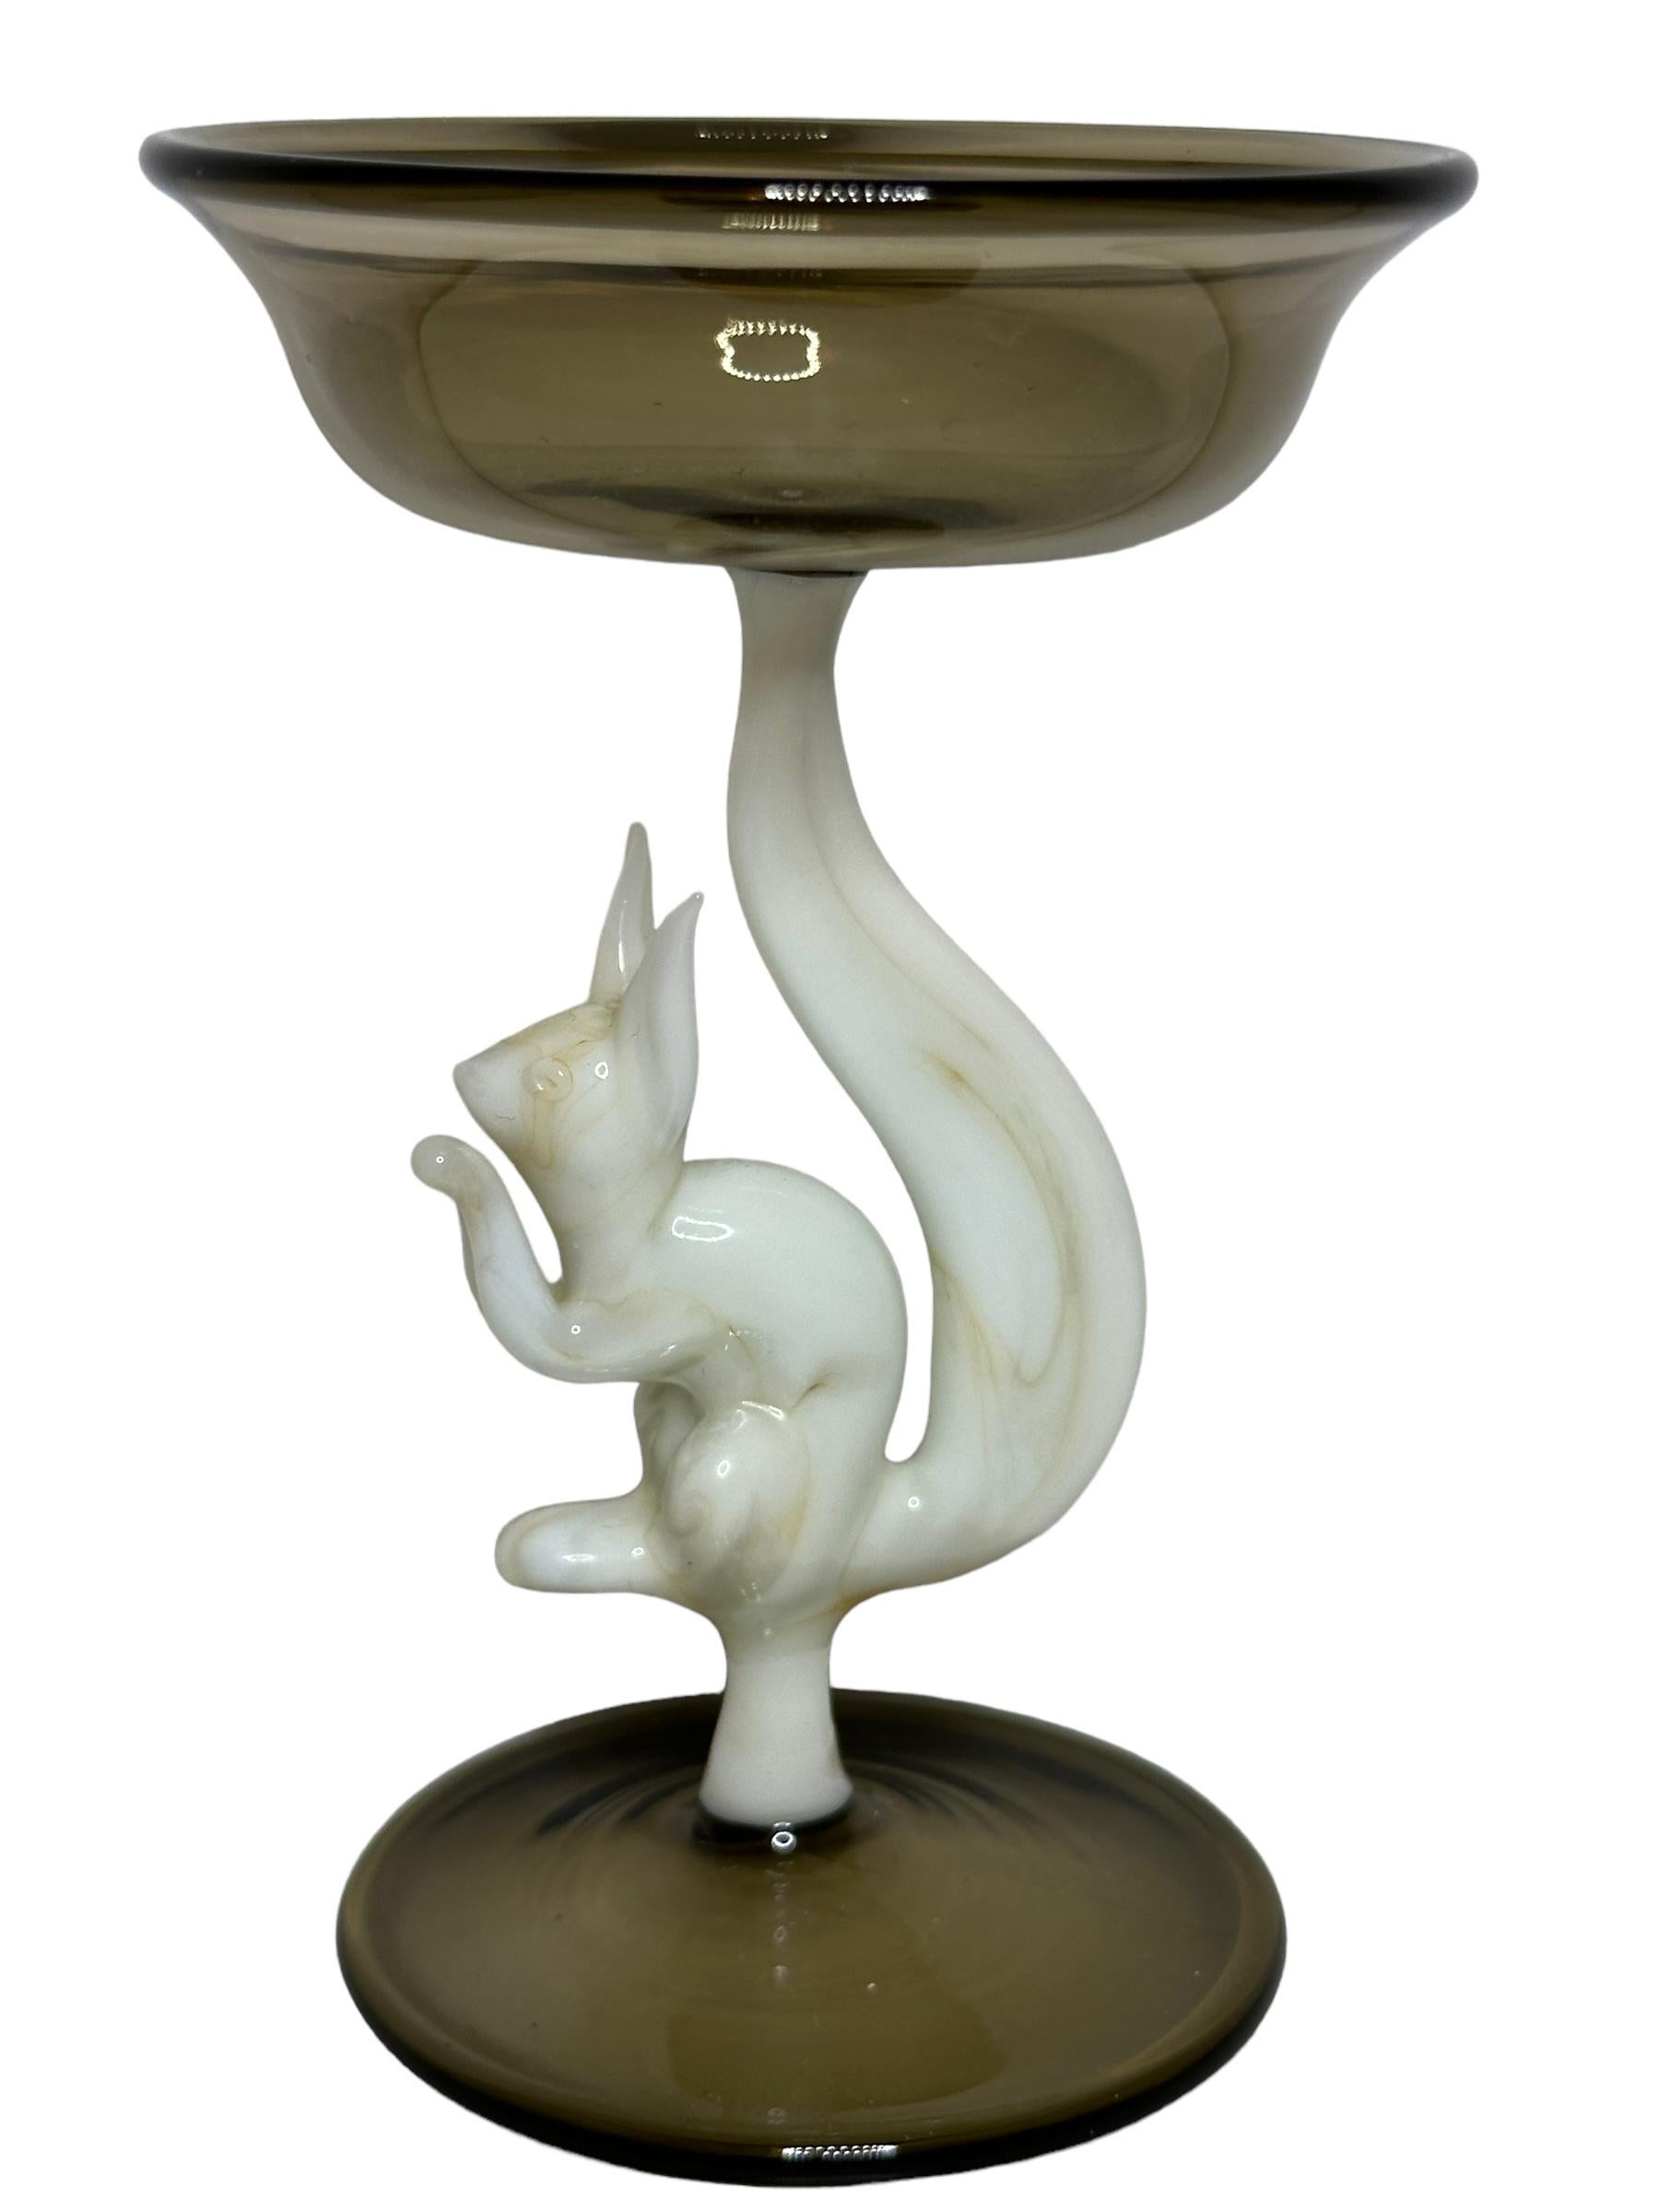 This is a beautiful single vintage stemmed liqueur glass from Austria. It features a animal shaft and is Bimini art style. The glass has a wonderful design, the stem depicts a Squirrel in white color. The base and the top is a beautiful smoked